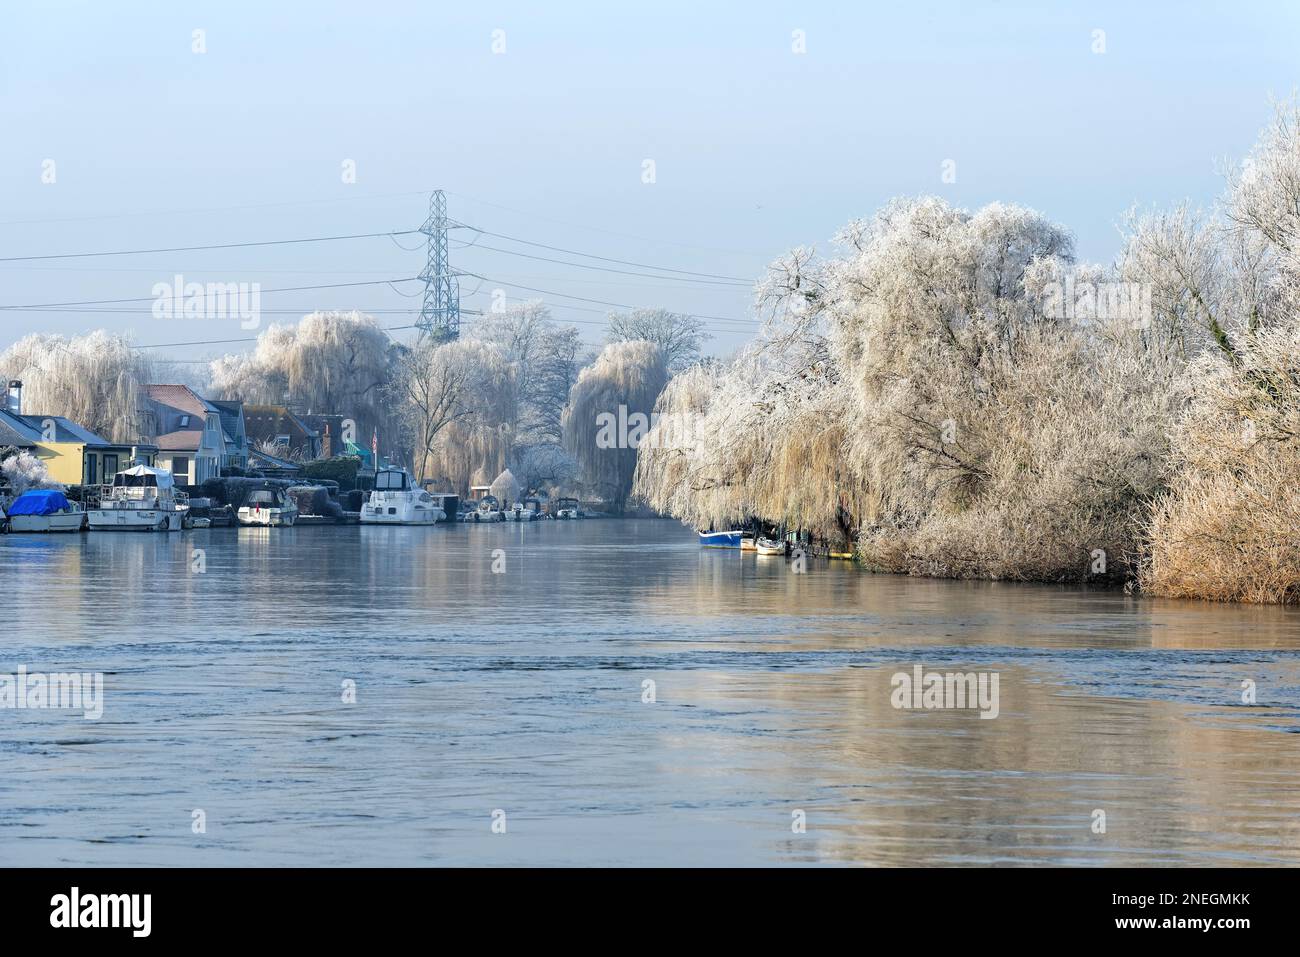 The riverside at Shepperton on a cold sunny winters day with trees and vegetation covered in hoar frost, Surrey England UK Stock Photo